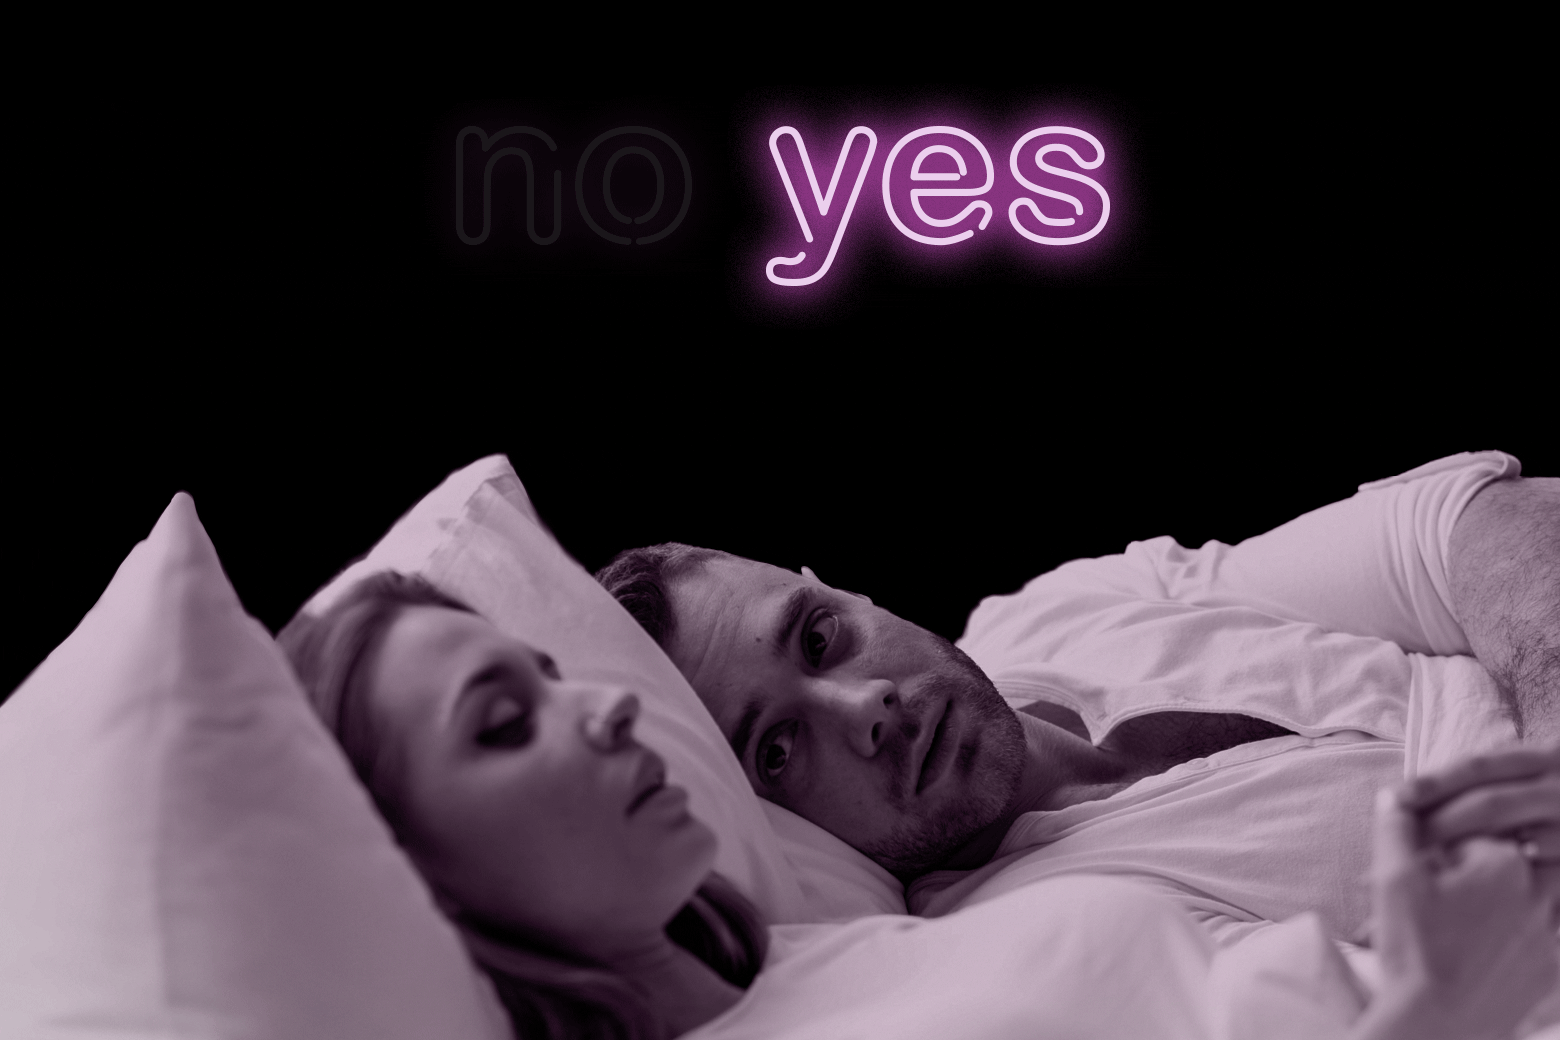 Man and woman in bed, with neon signs above them flashing YES and NO.